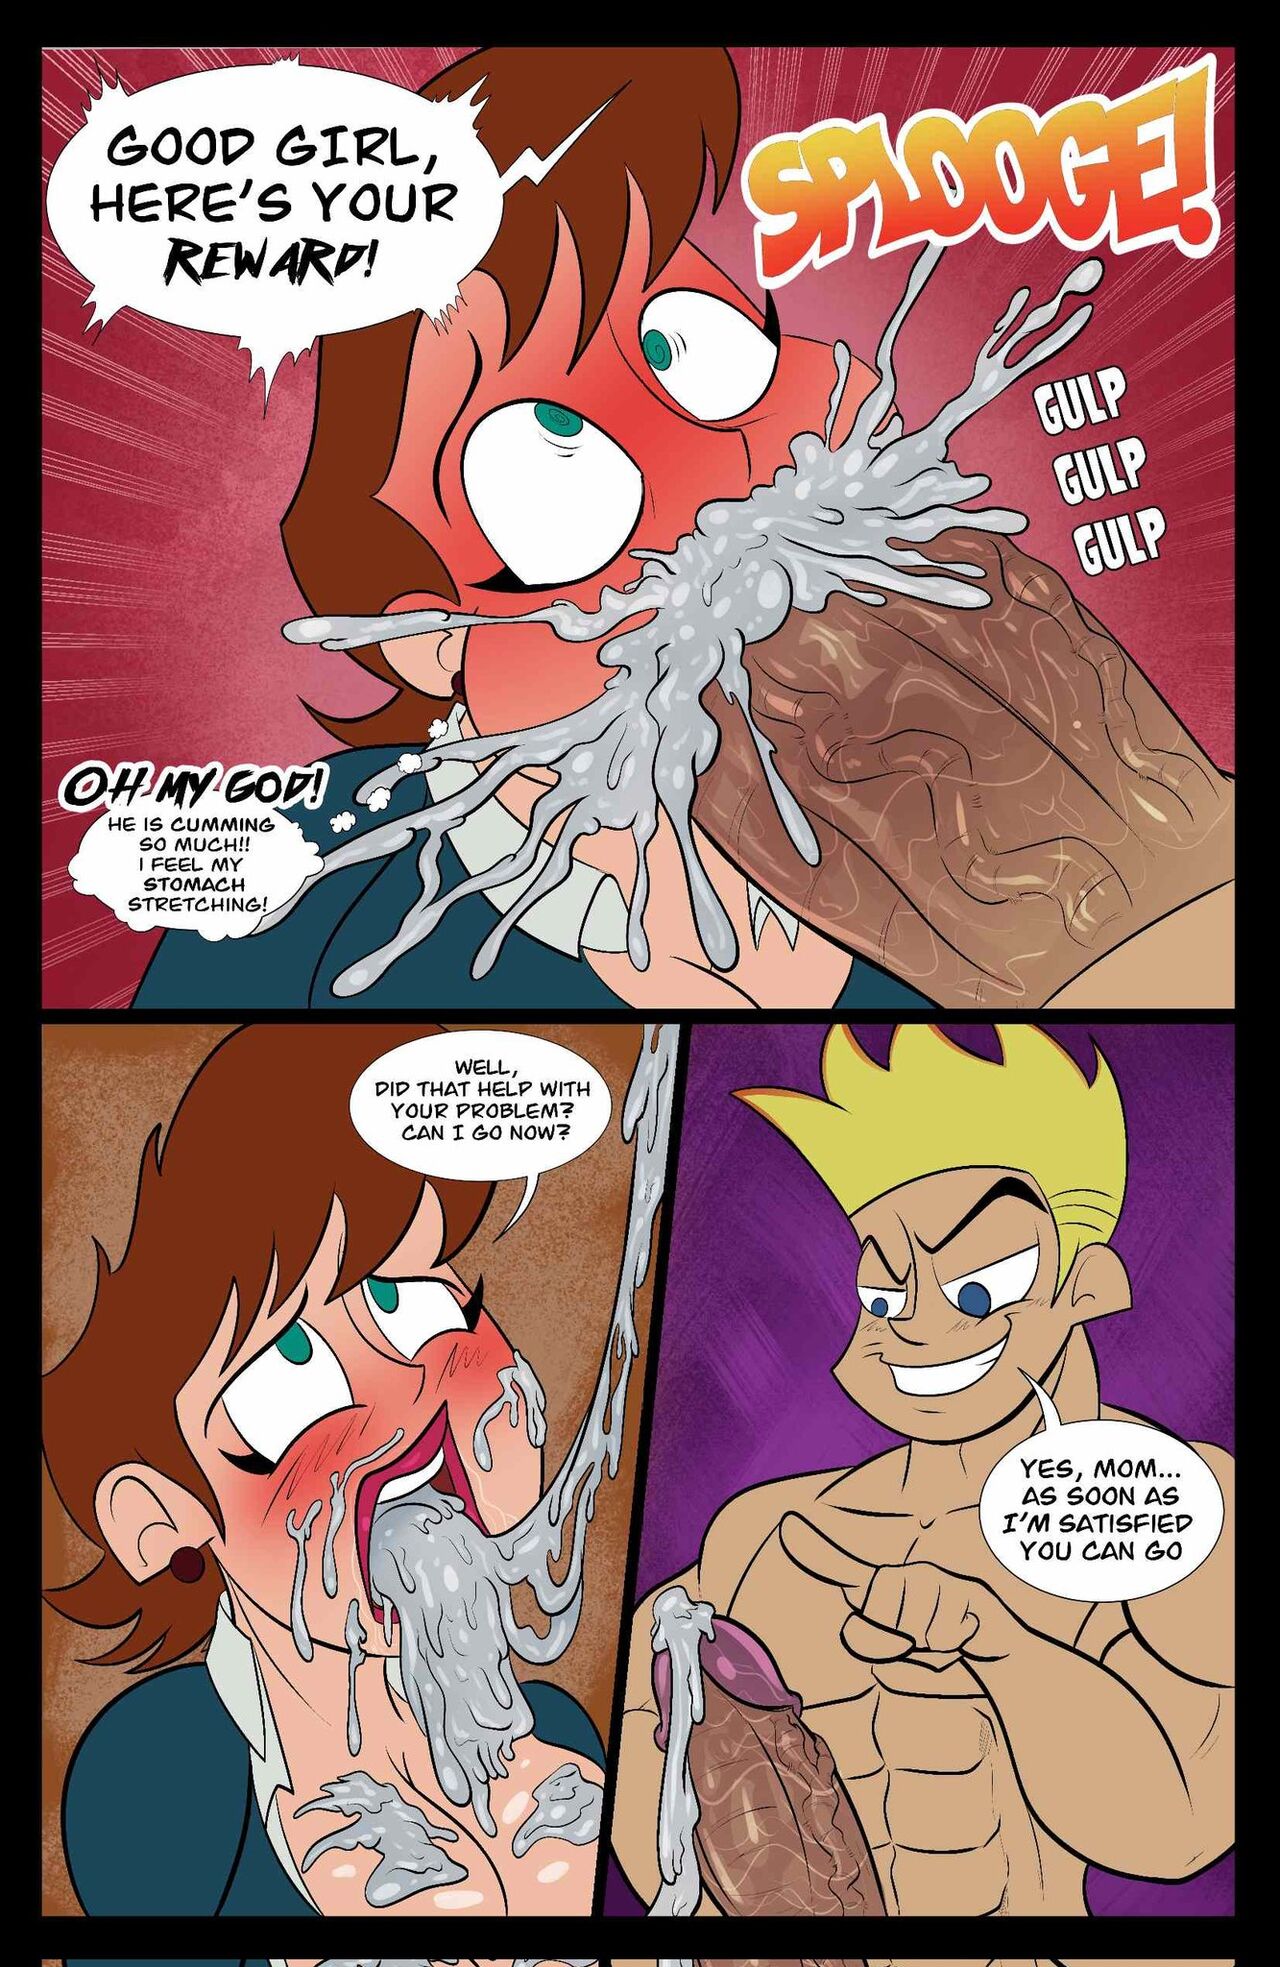 Test subjects - Johnny Test [ameizing_lewds] - FreeAdultComix